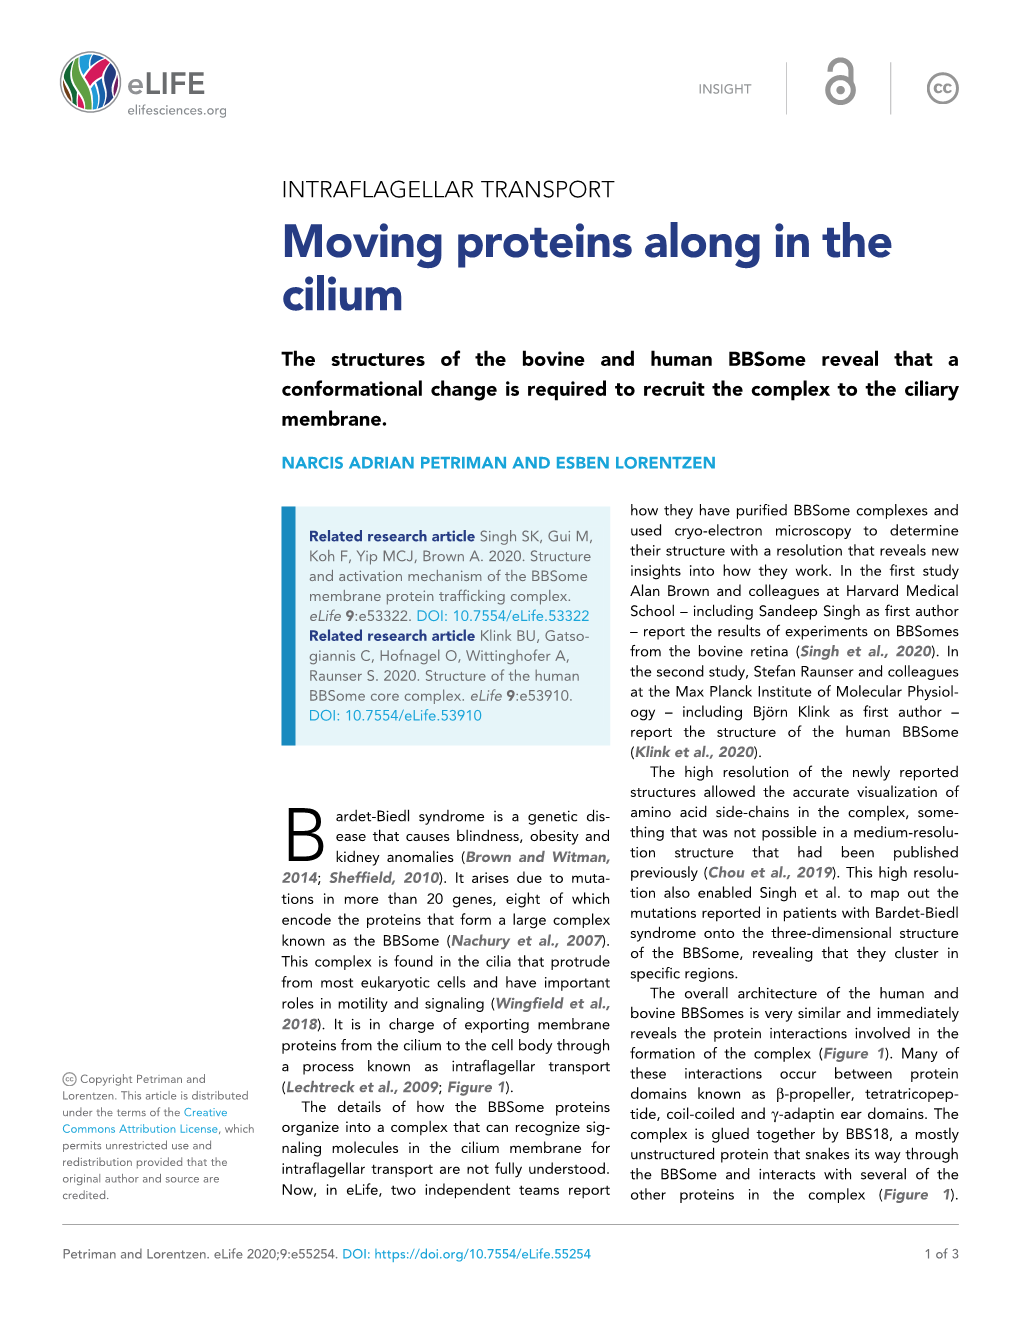 Moving Proteins Along in the Cilium